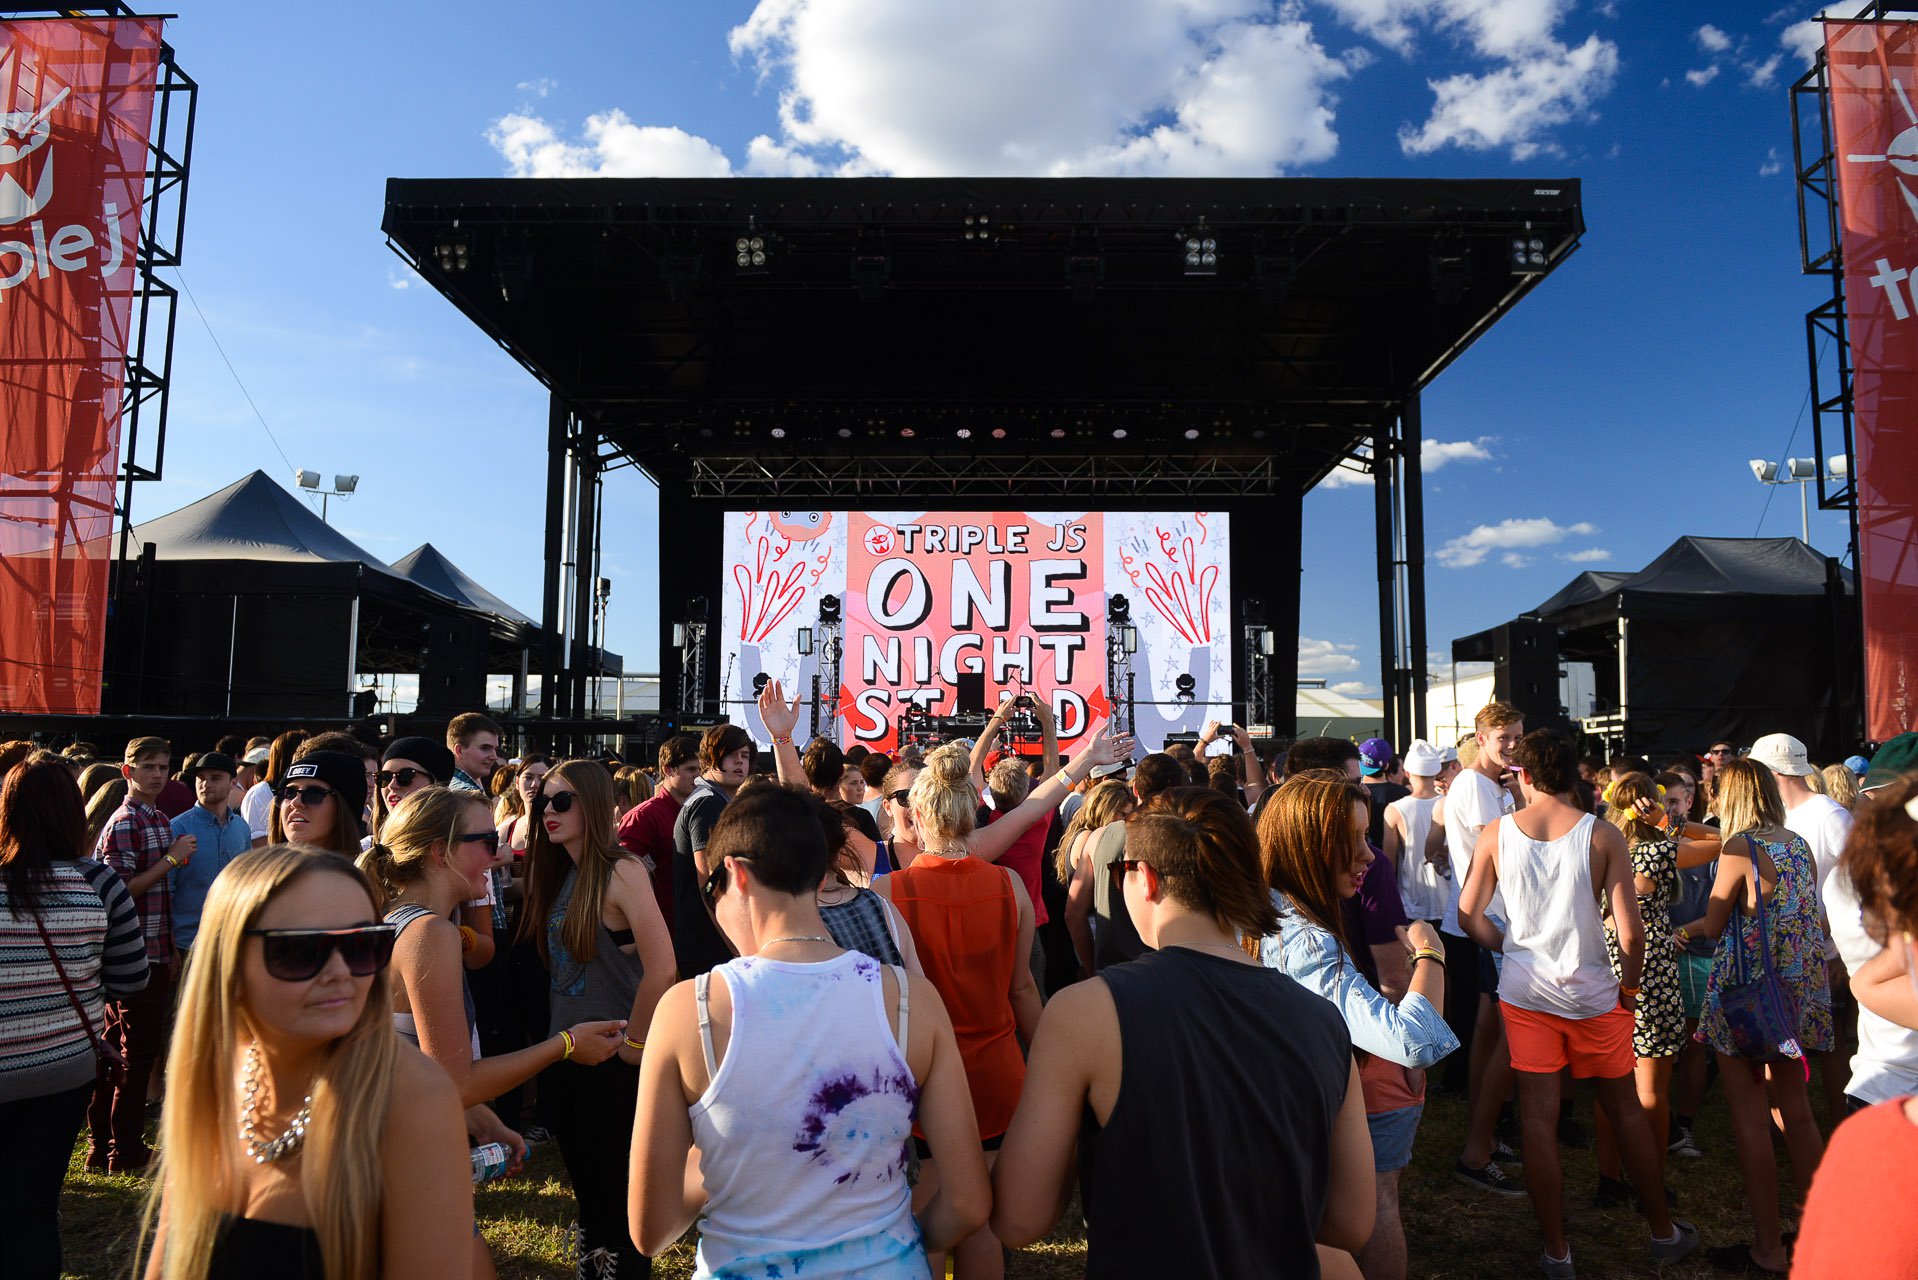 triple j announces guests for this weekend’s One Night Stand